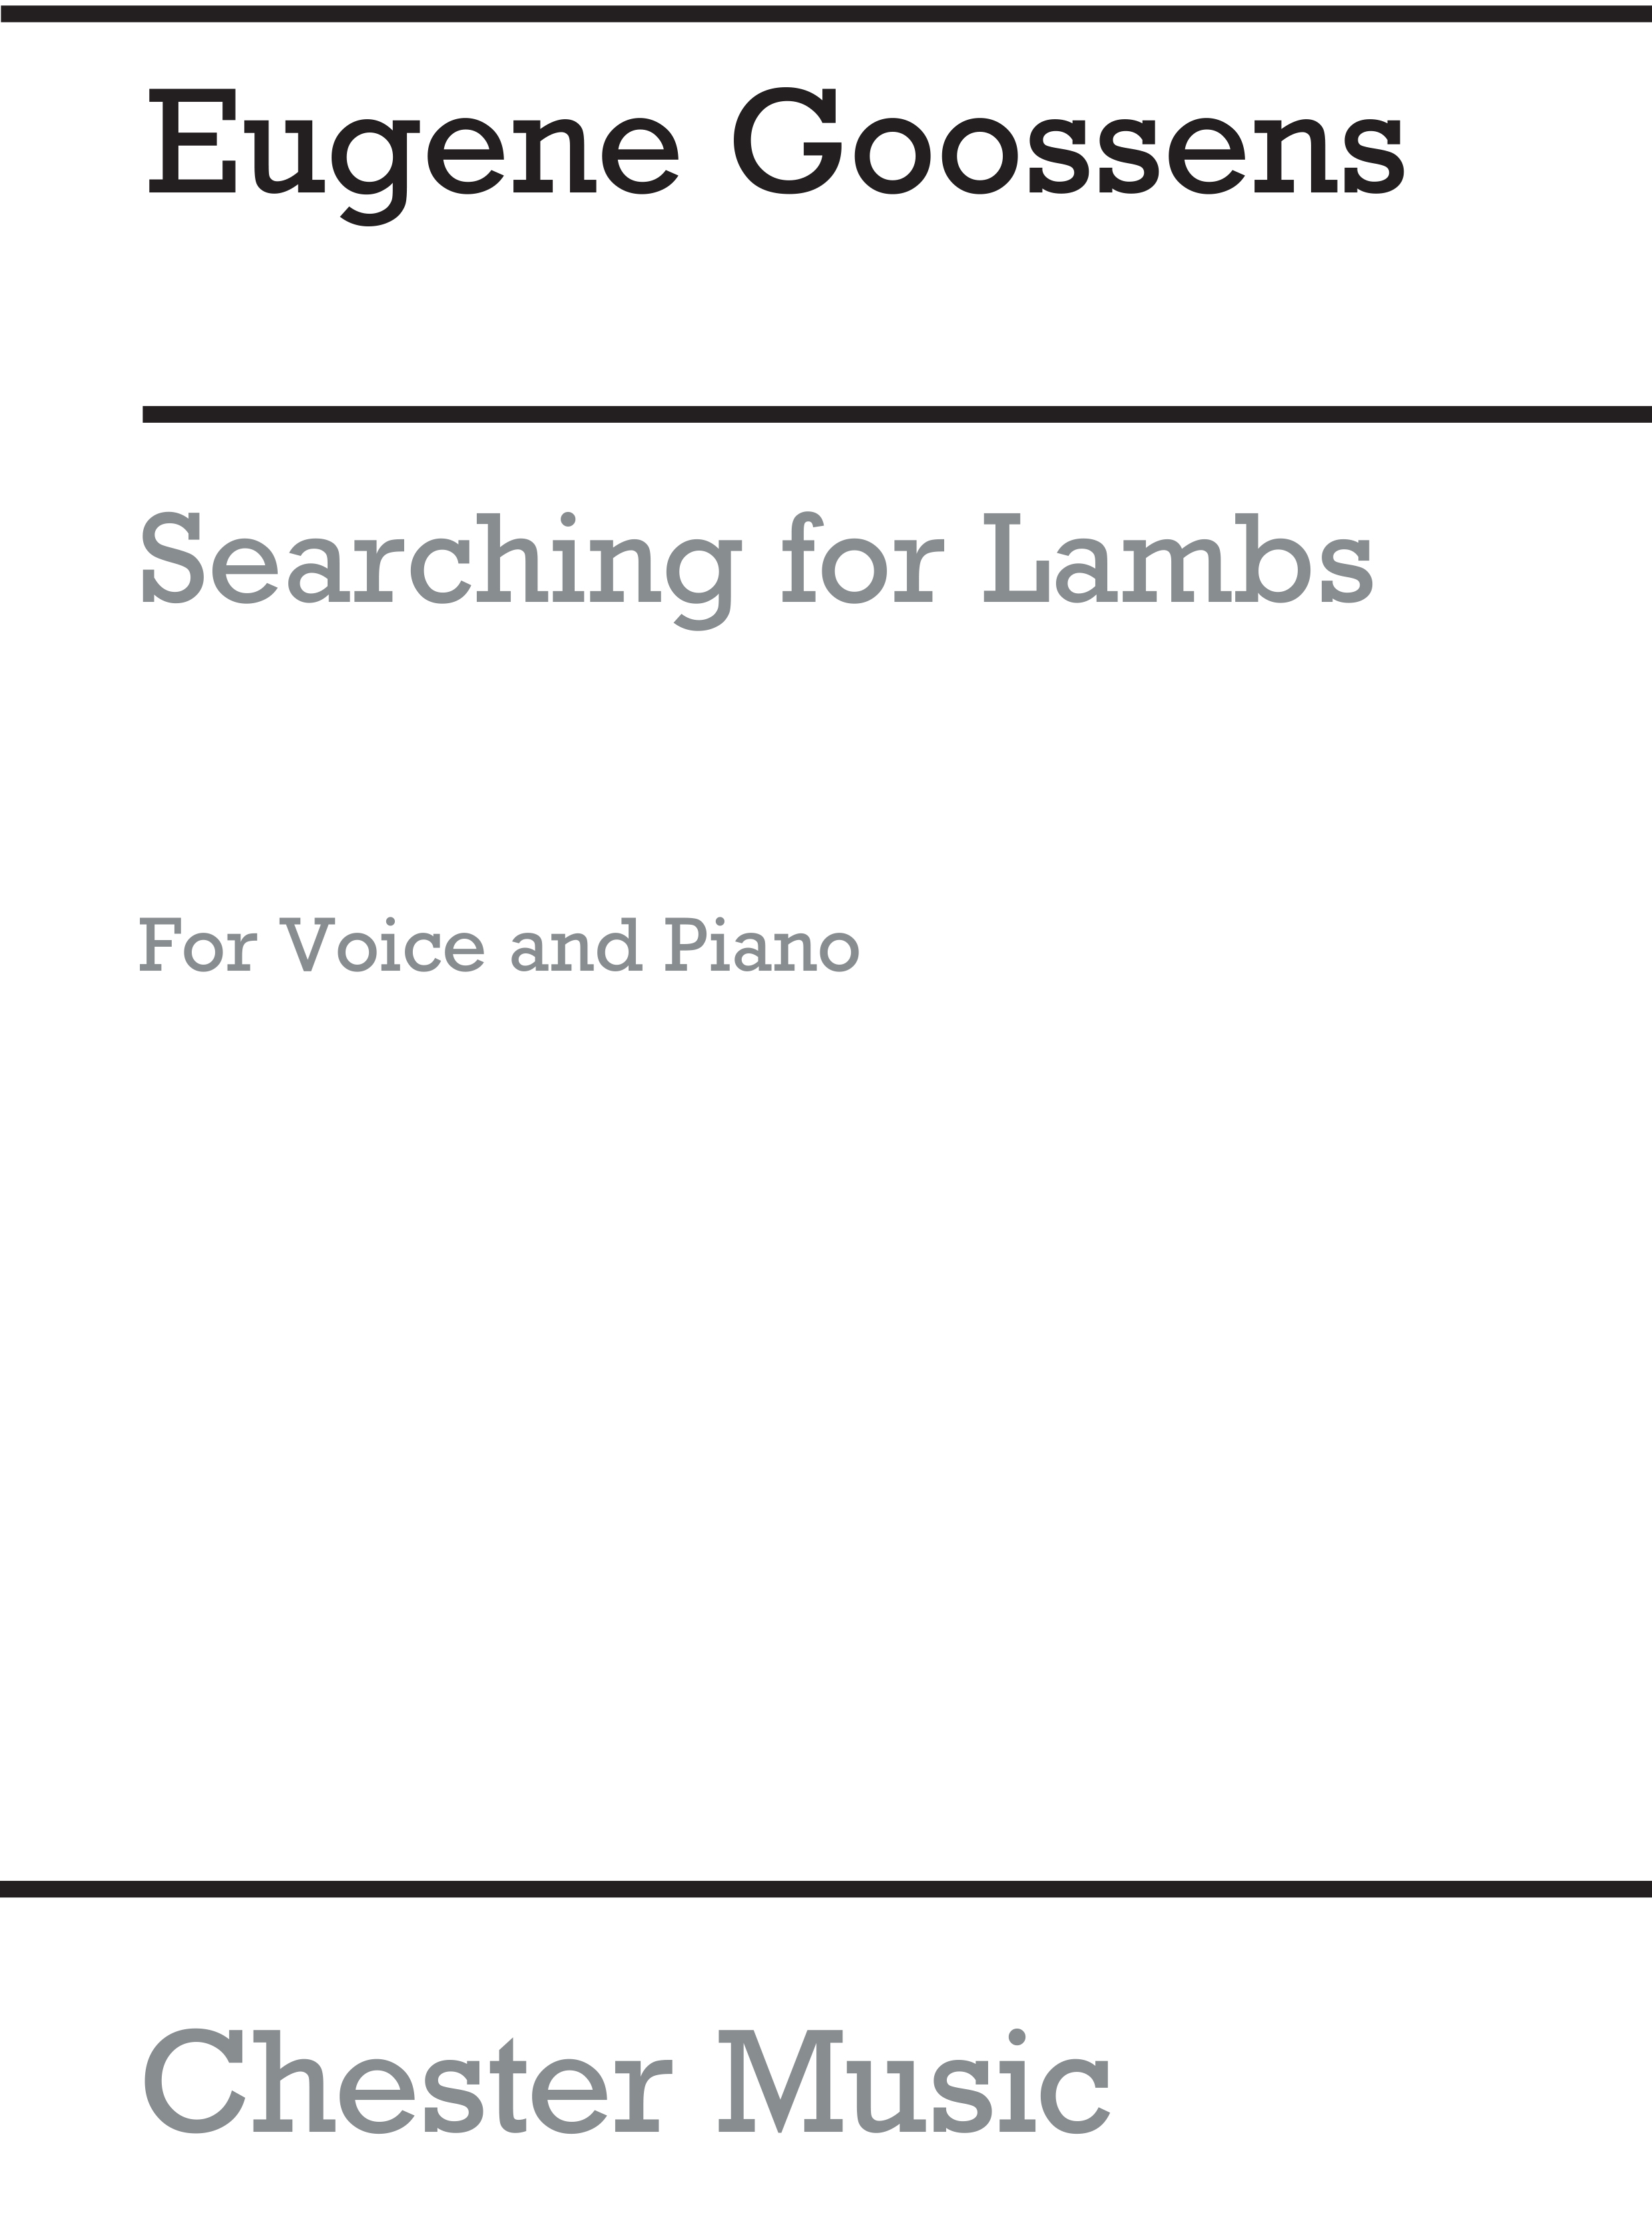 Eugene Goossens: Searching For Lambs. Song for Voice and Piano: Voice: